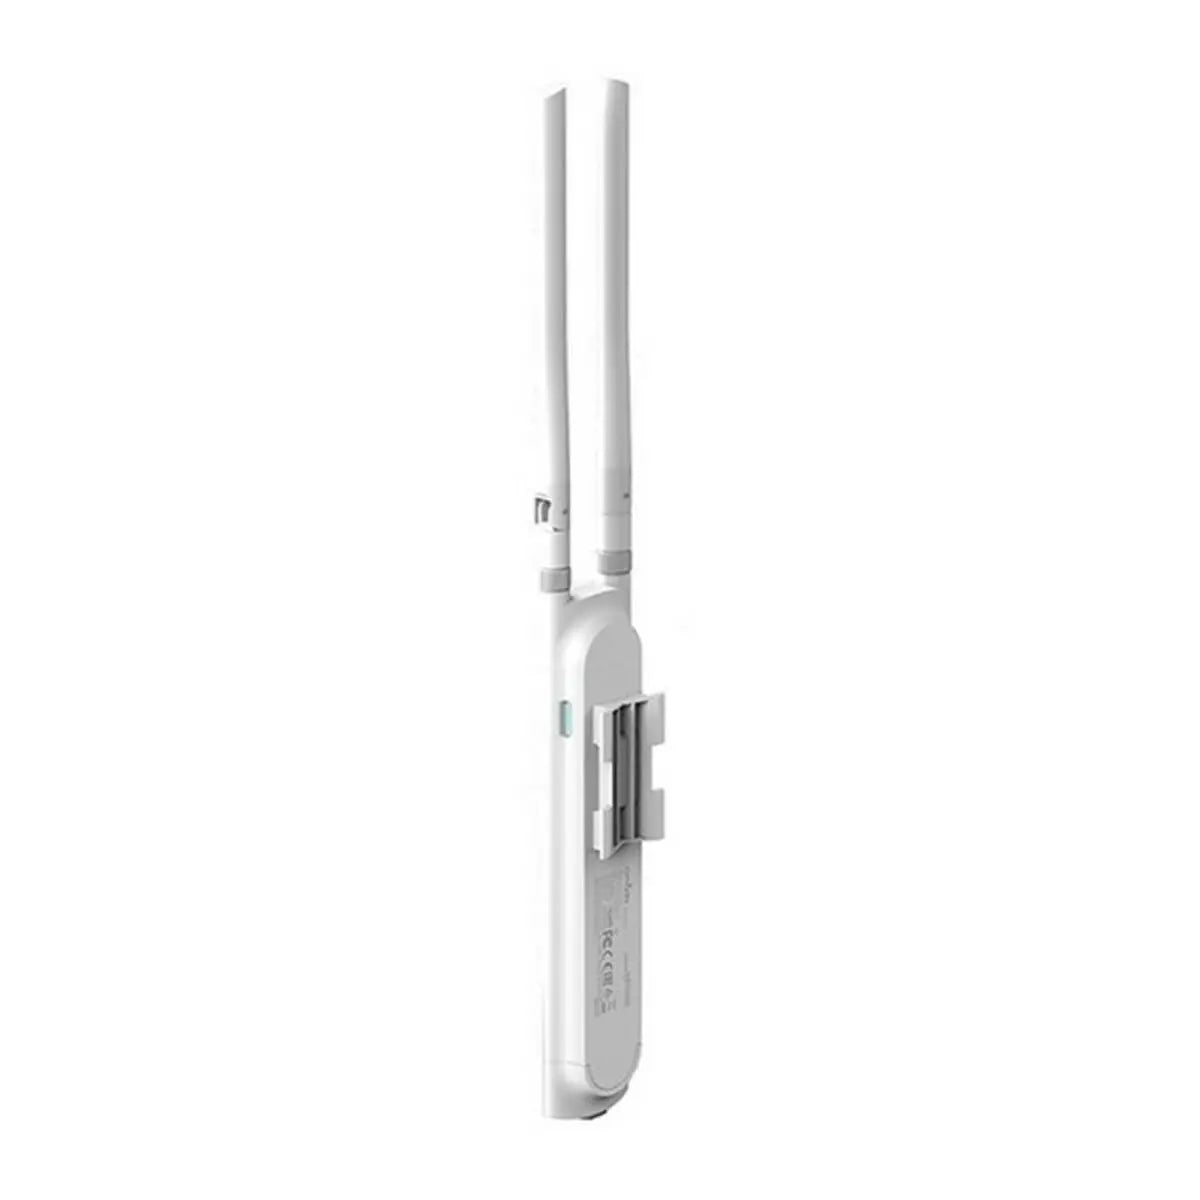 Access point TP-Link AC1200 White